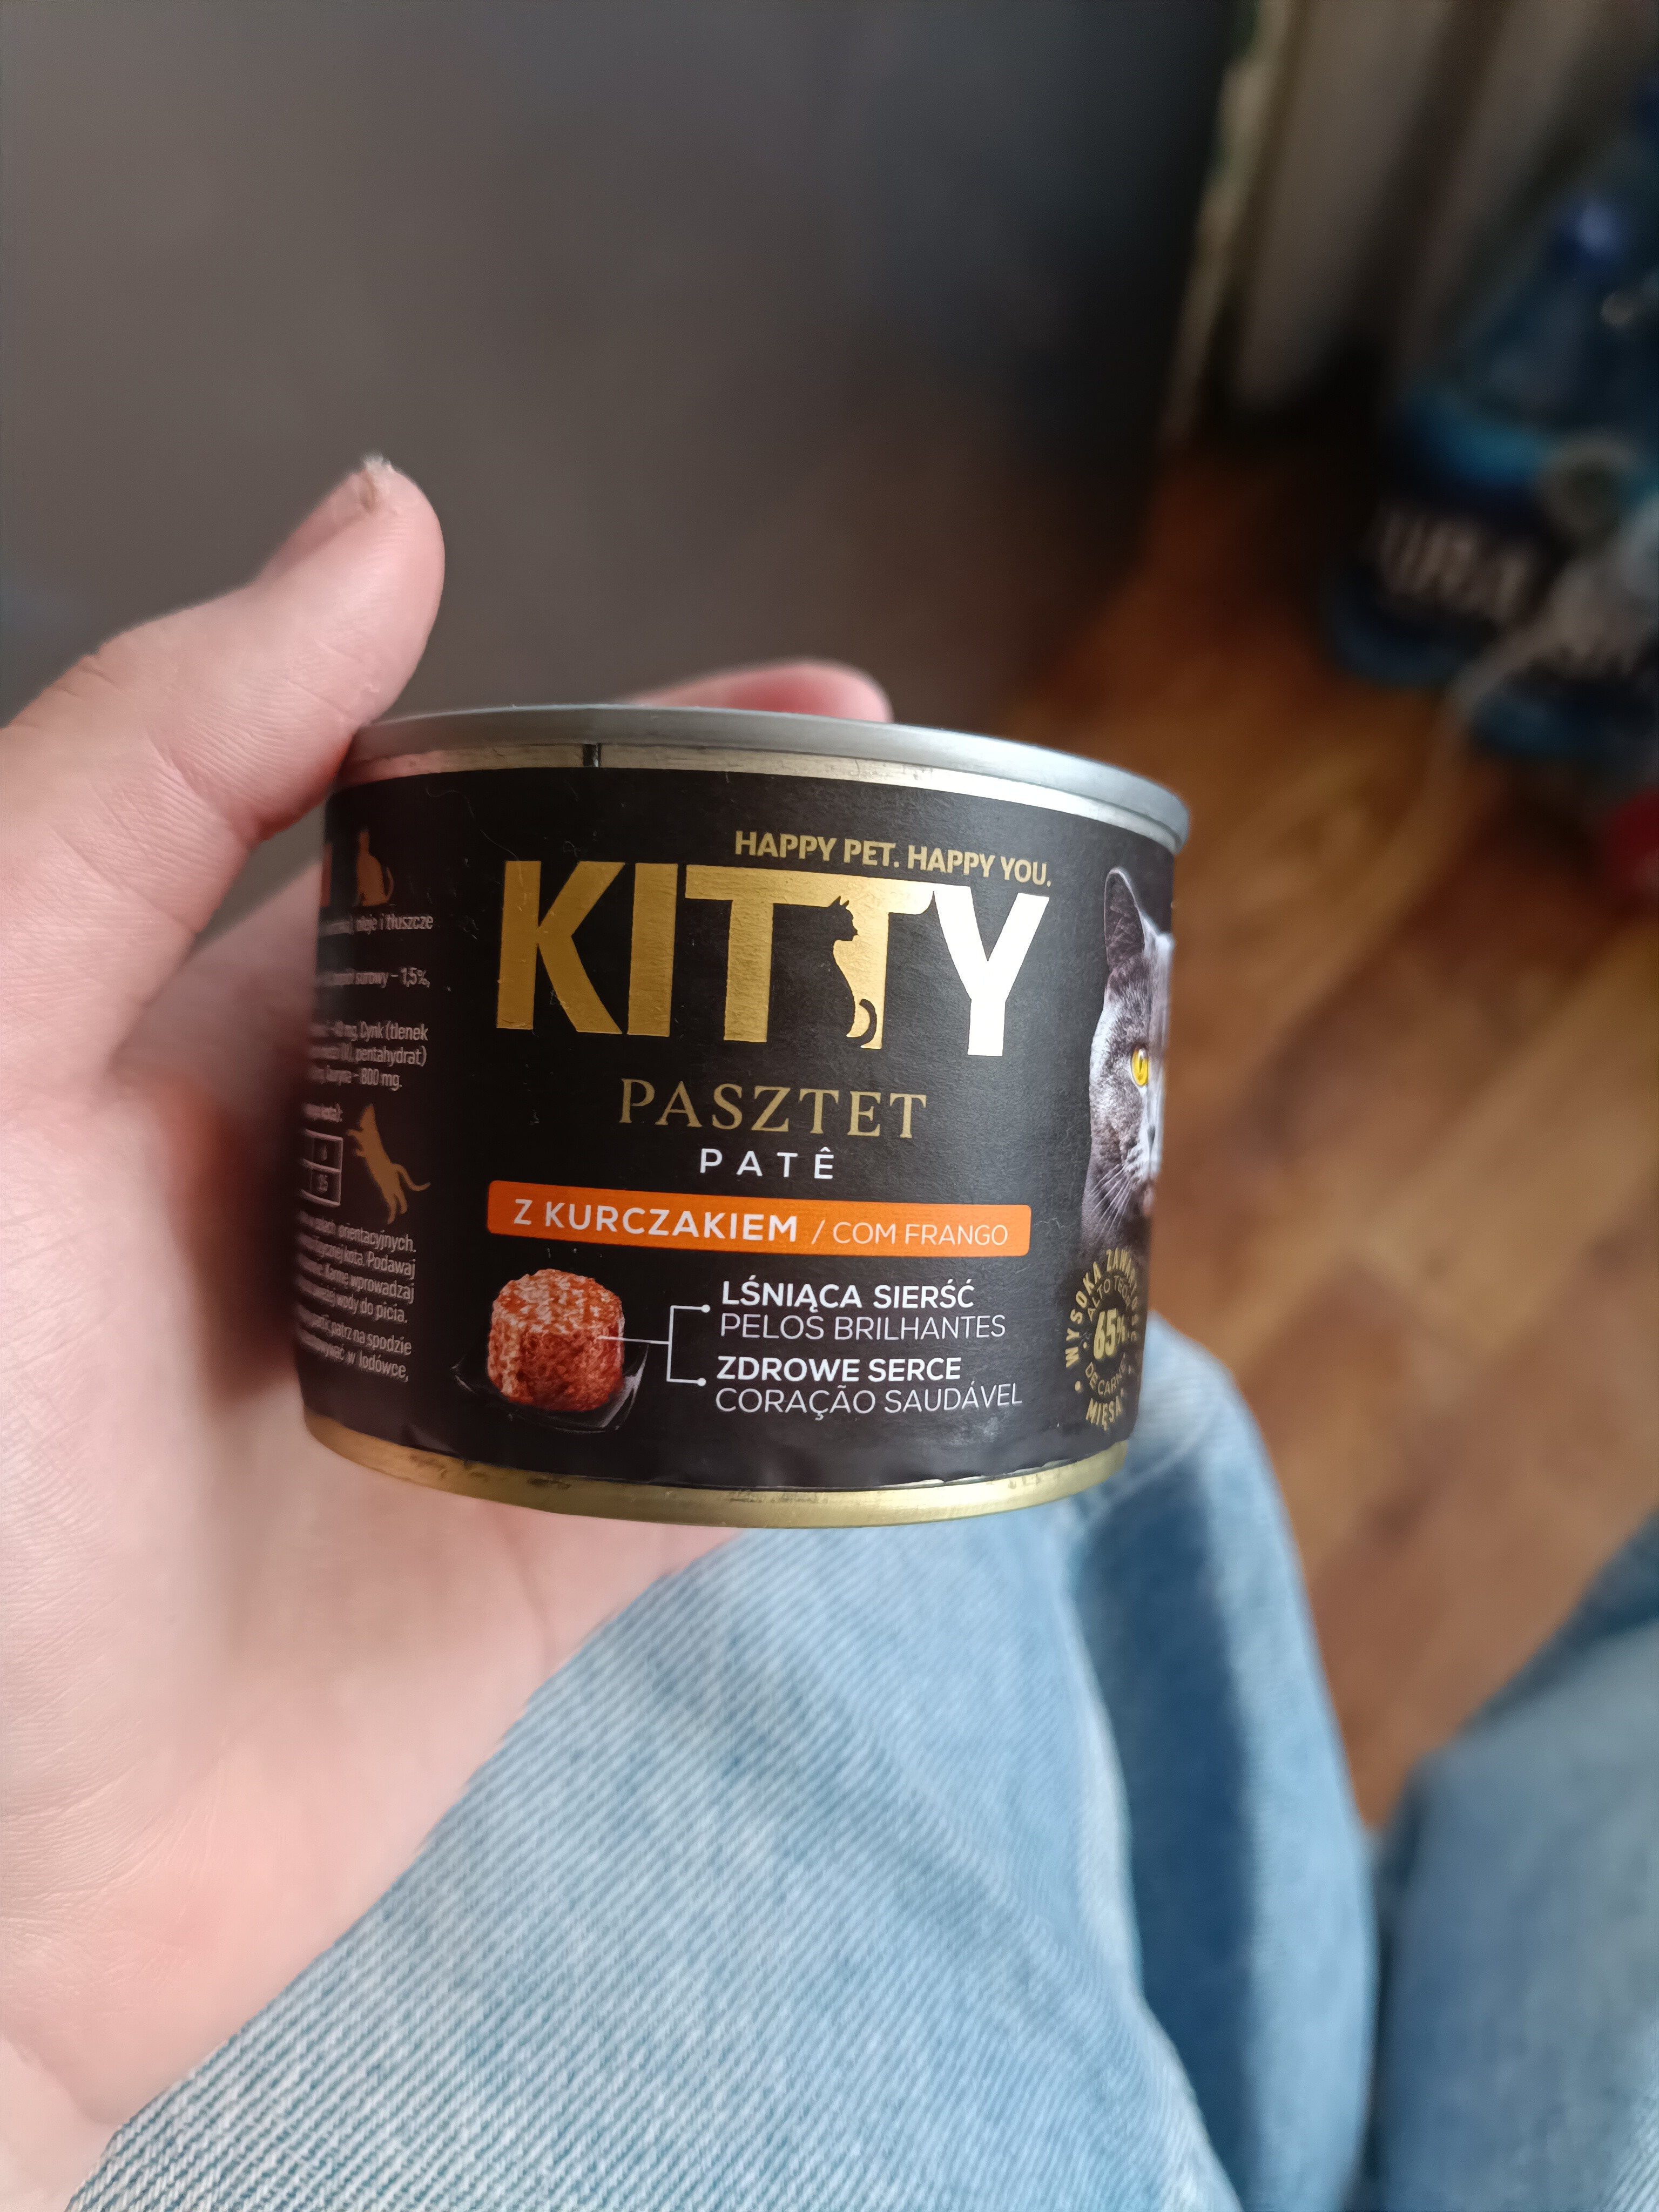 kitty - Product - pl